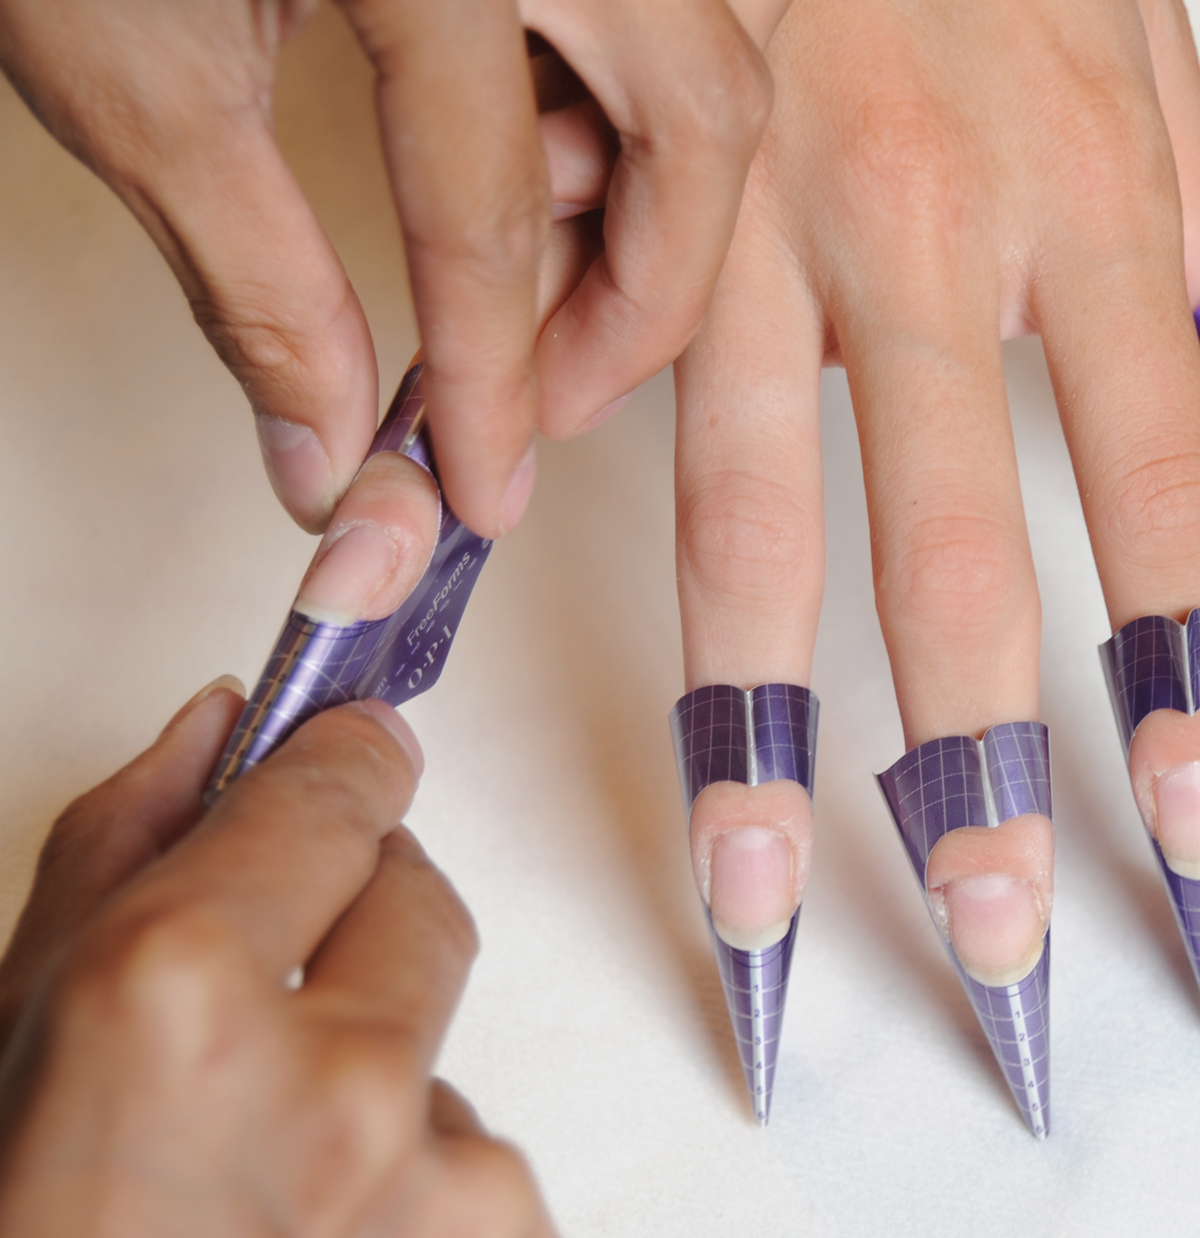 Apex Nails: Your Guide to Designing the Perfect Manicure